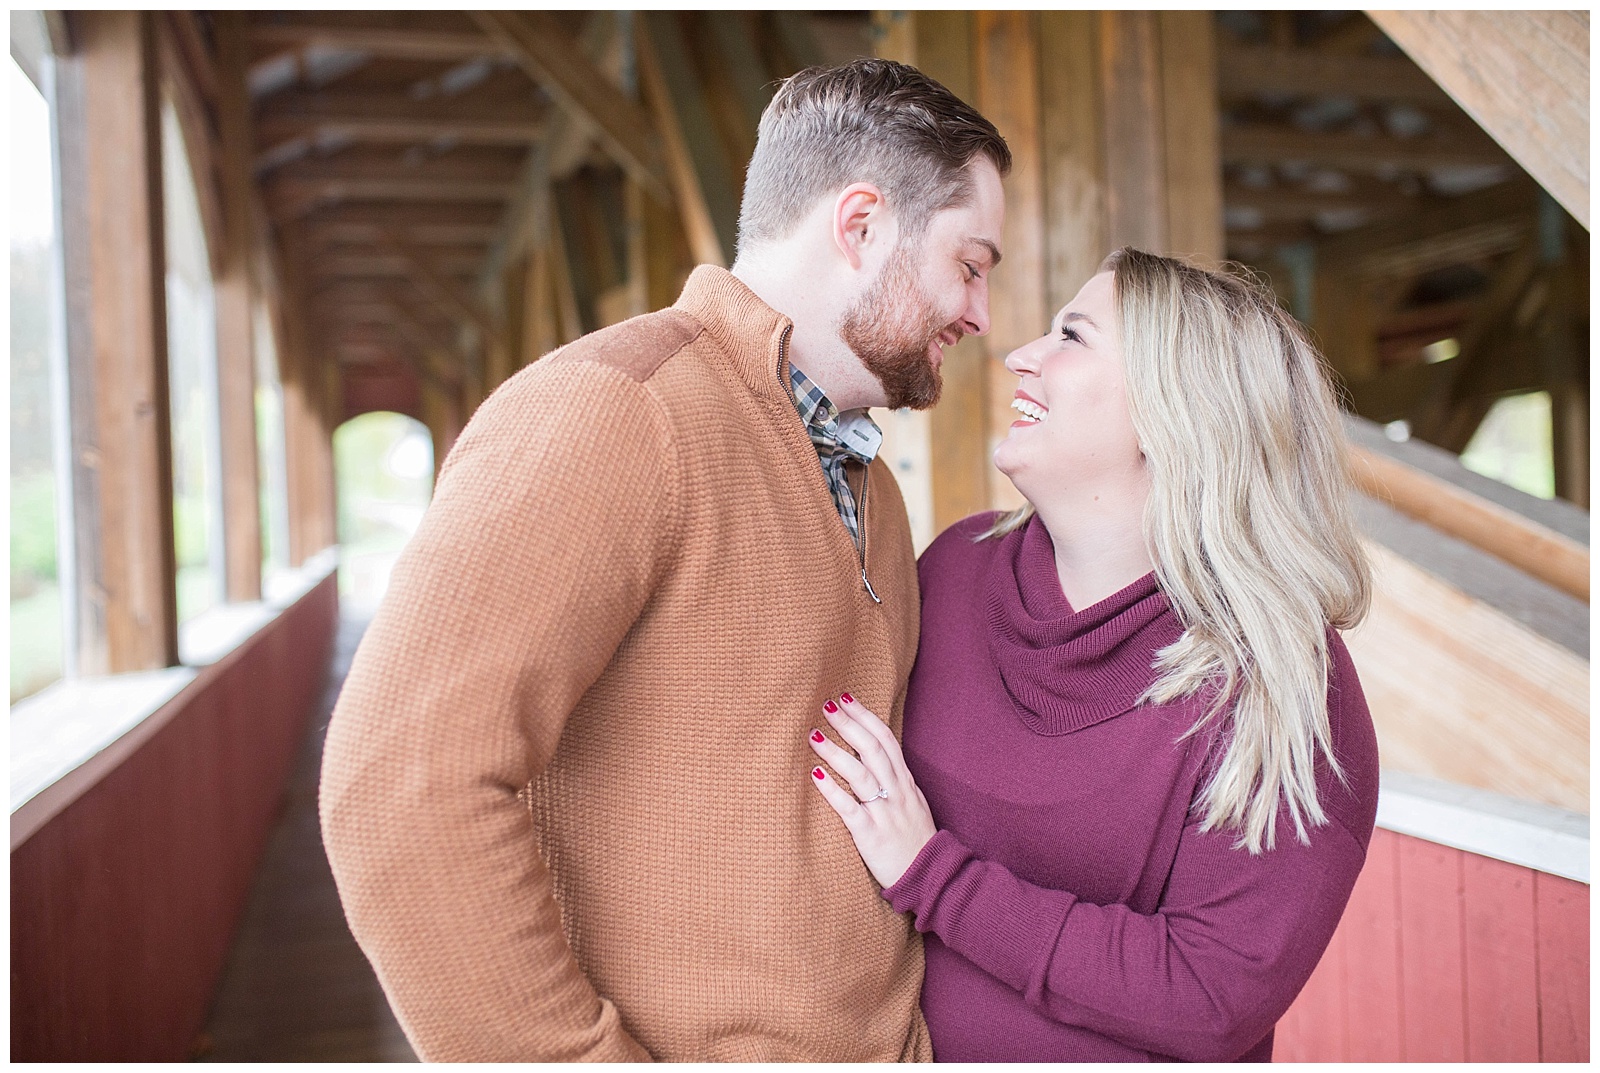 Fall Engagement Session | Monica Brown Photography | monicabrownphoto.com